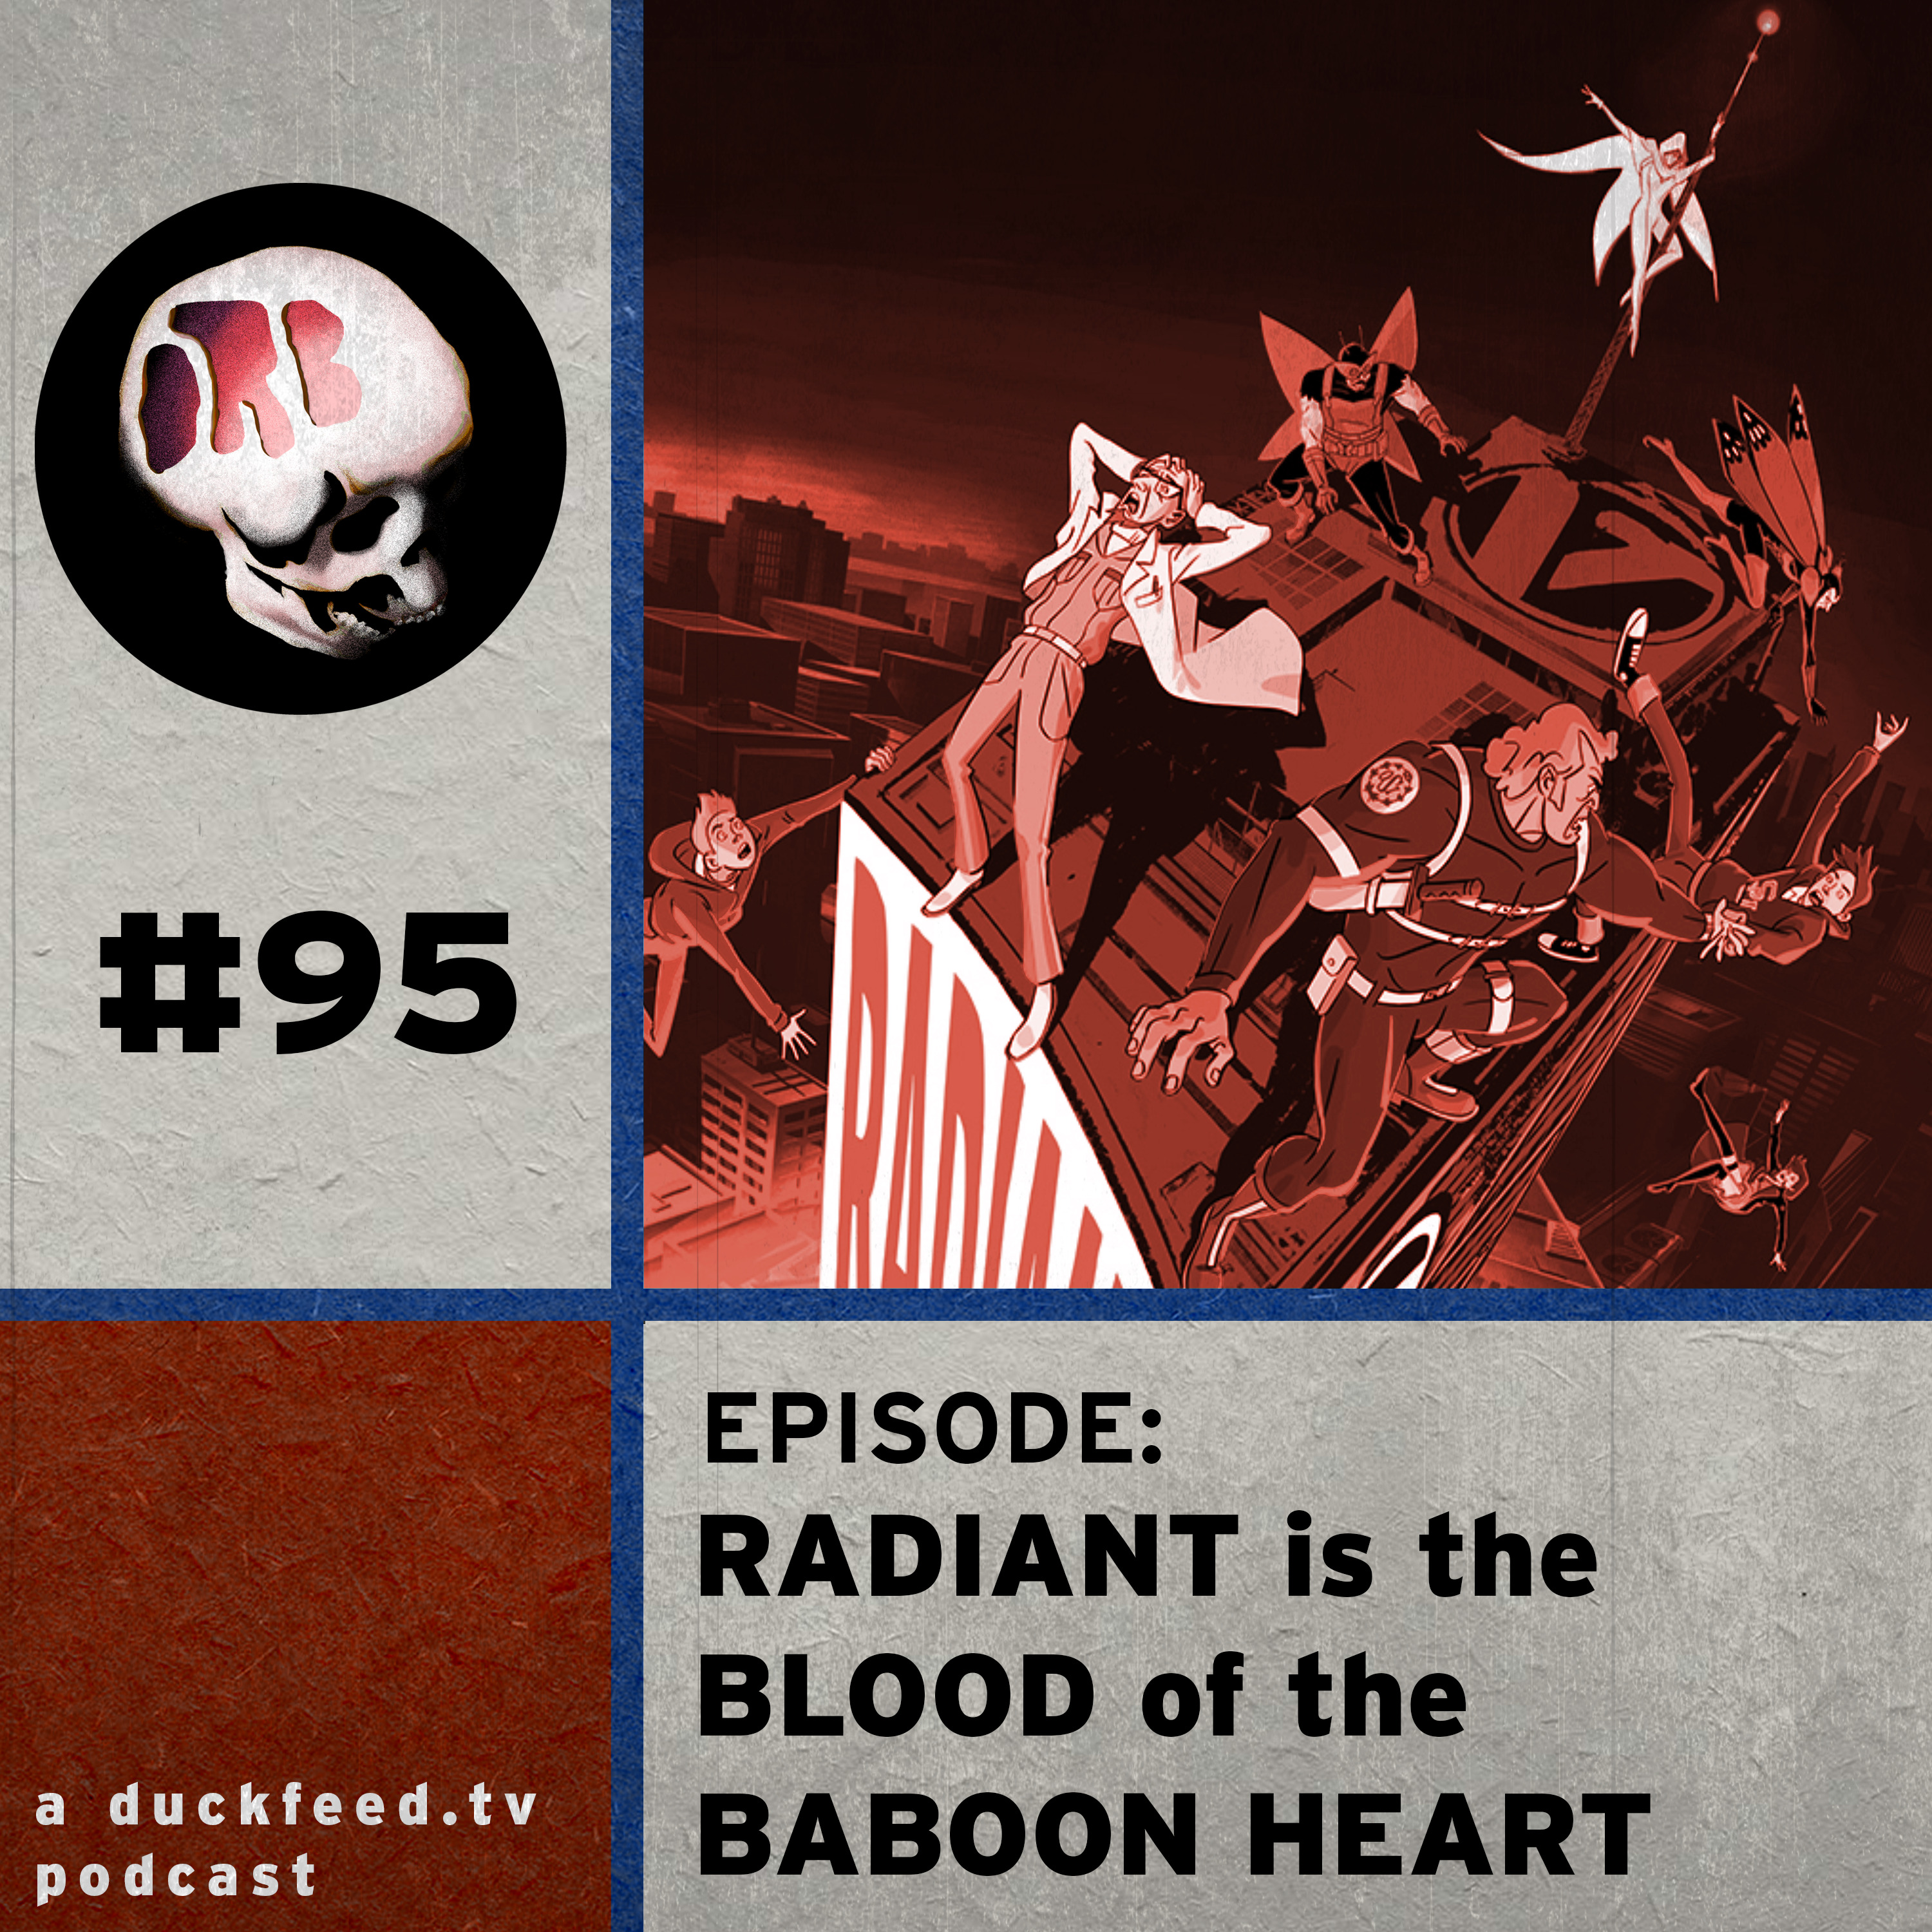 Episode 95: Radiant is the Blood of the Baboon Heart